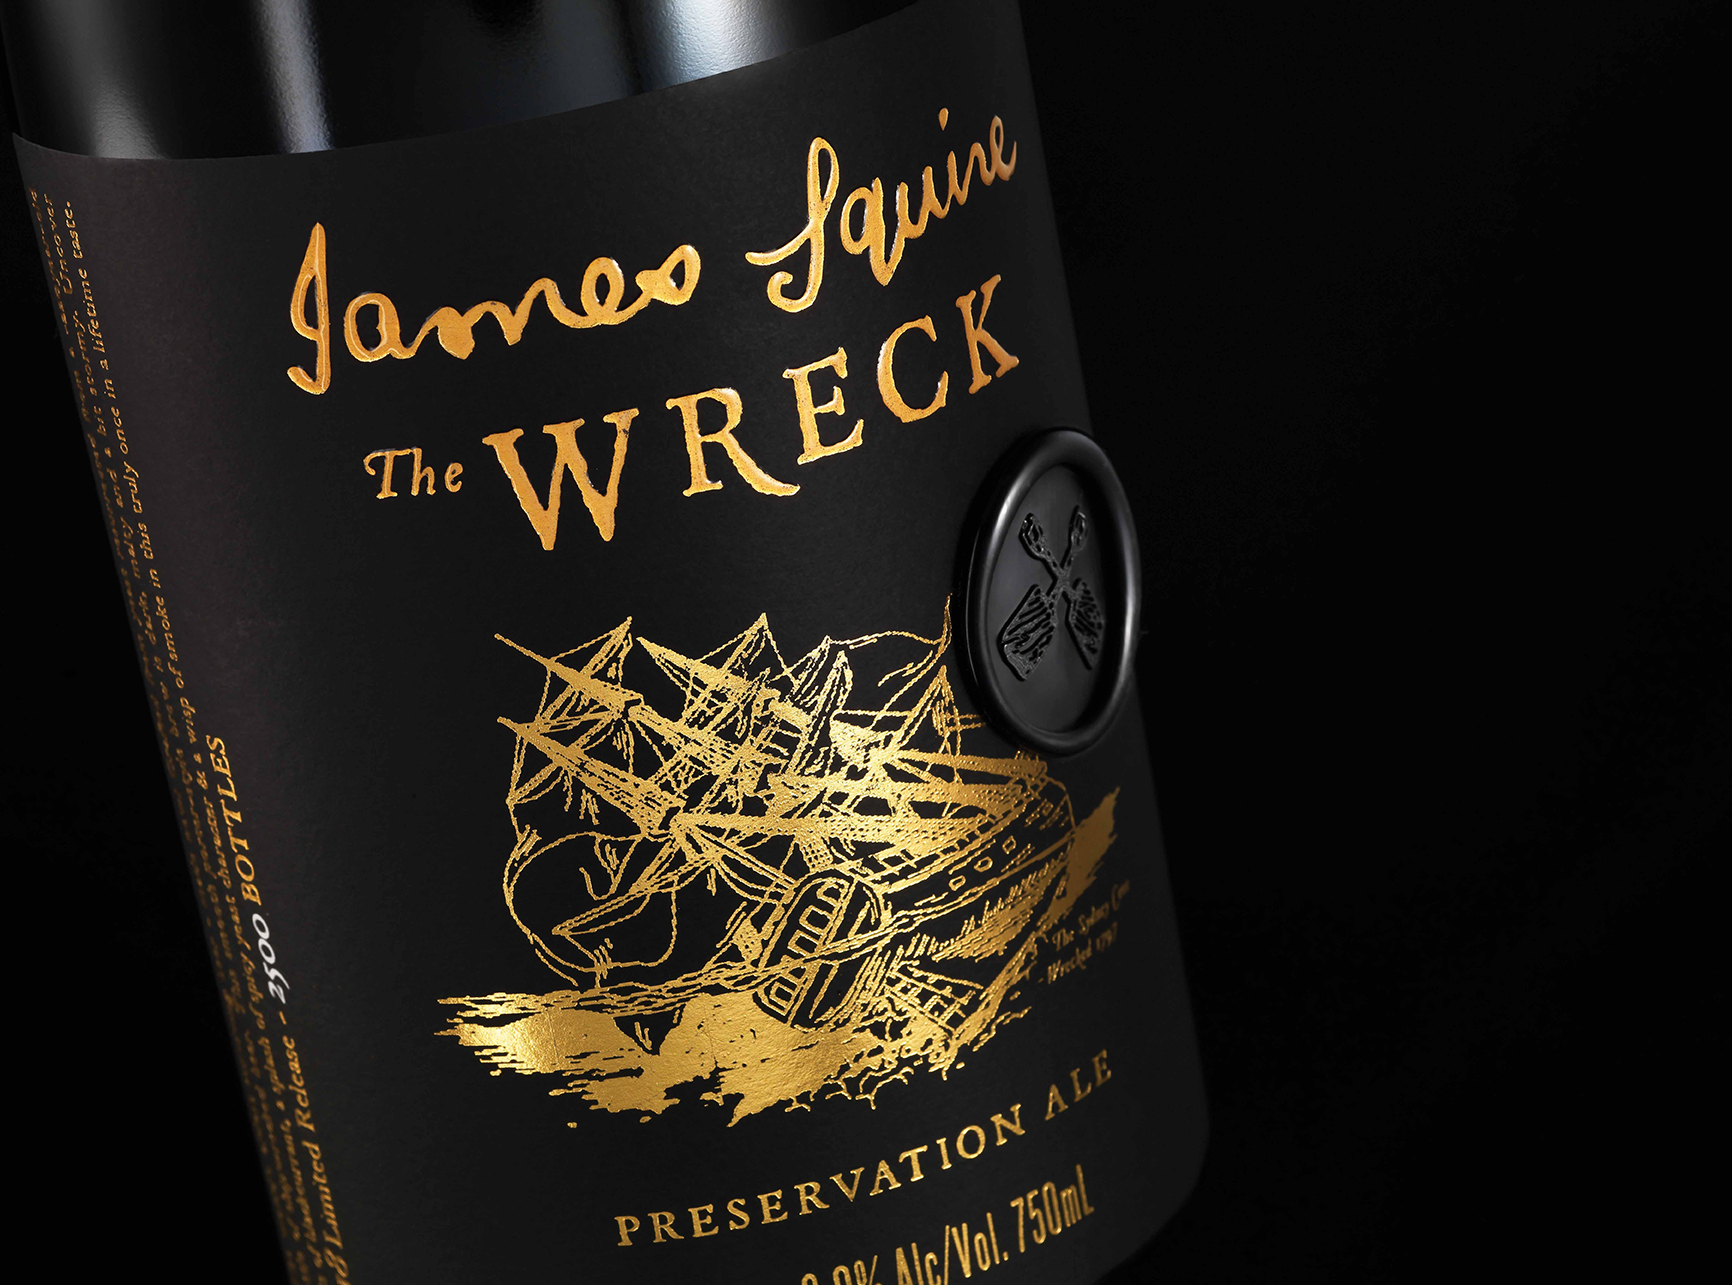 Energi Packaging Design Agency Specialists James Squire The Wreck Preservation Ale Beer Bottle Wax Seal Limited Release Closeup Label Design Product Photography